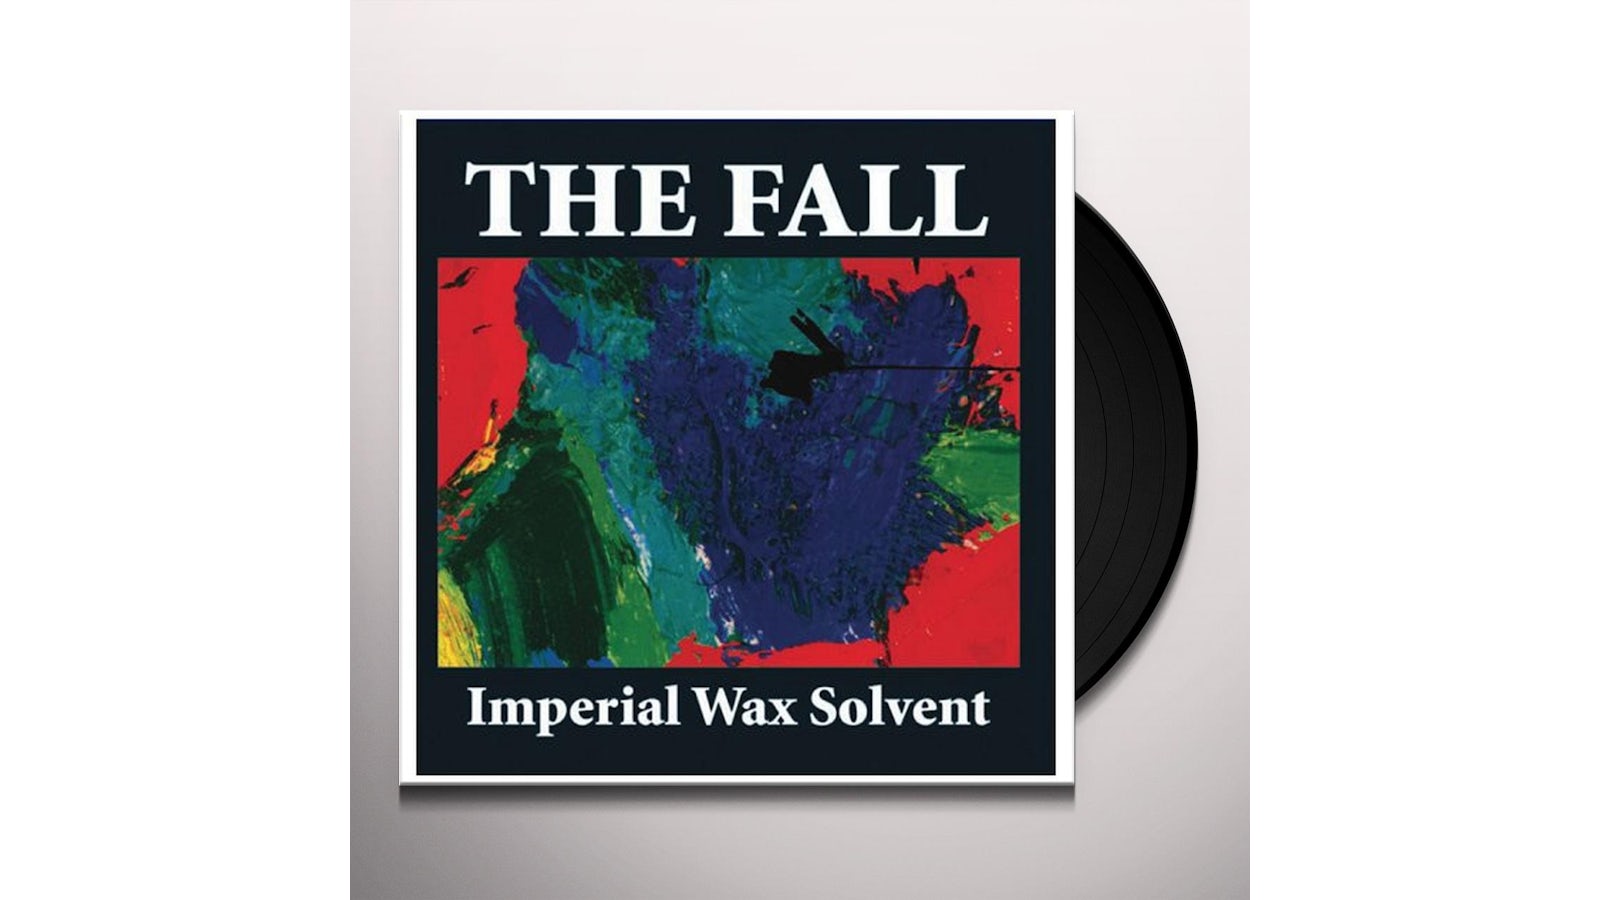 Fall IMPERIAL WAX SOLVENT Vinyl Record